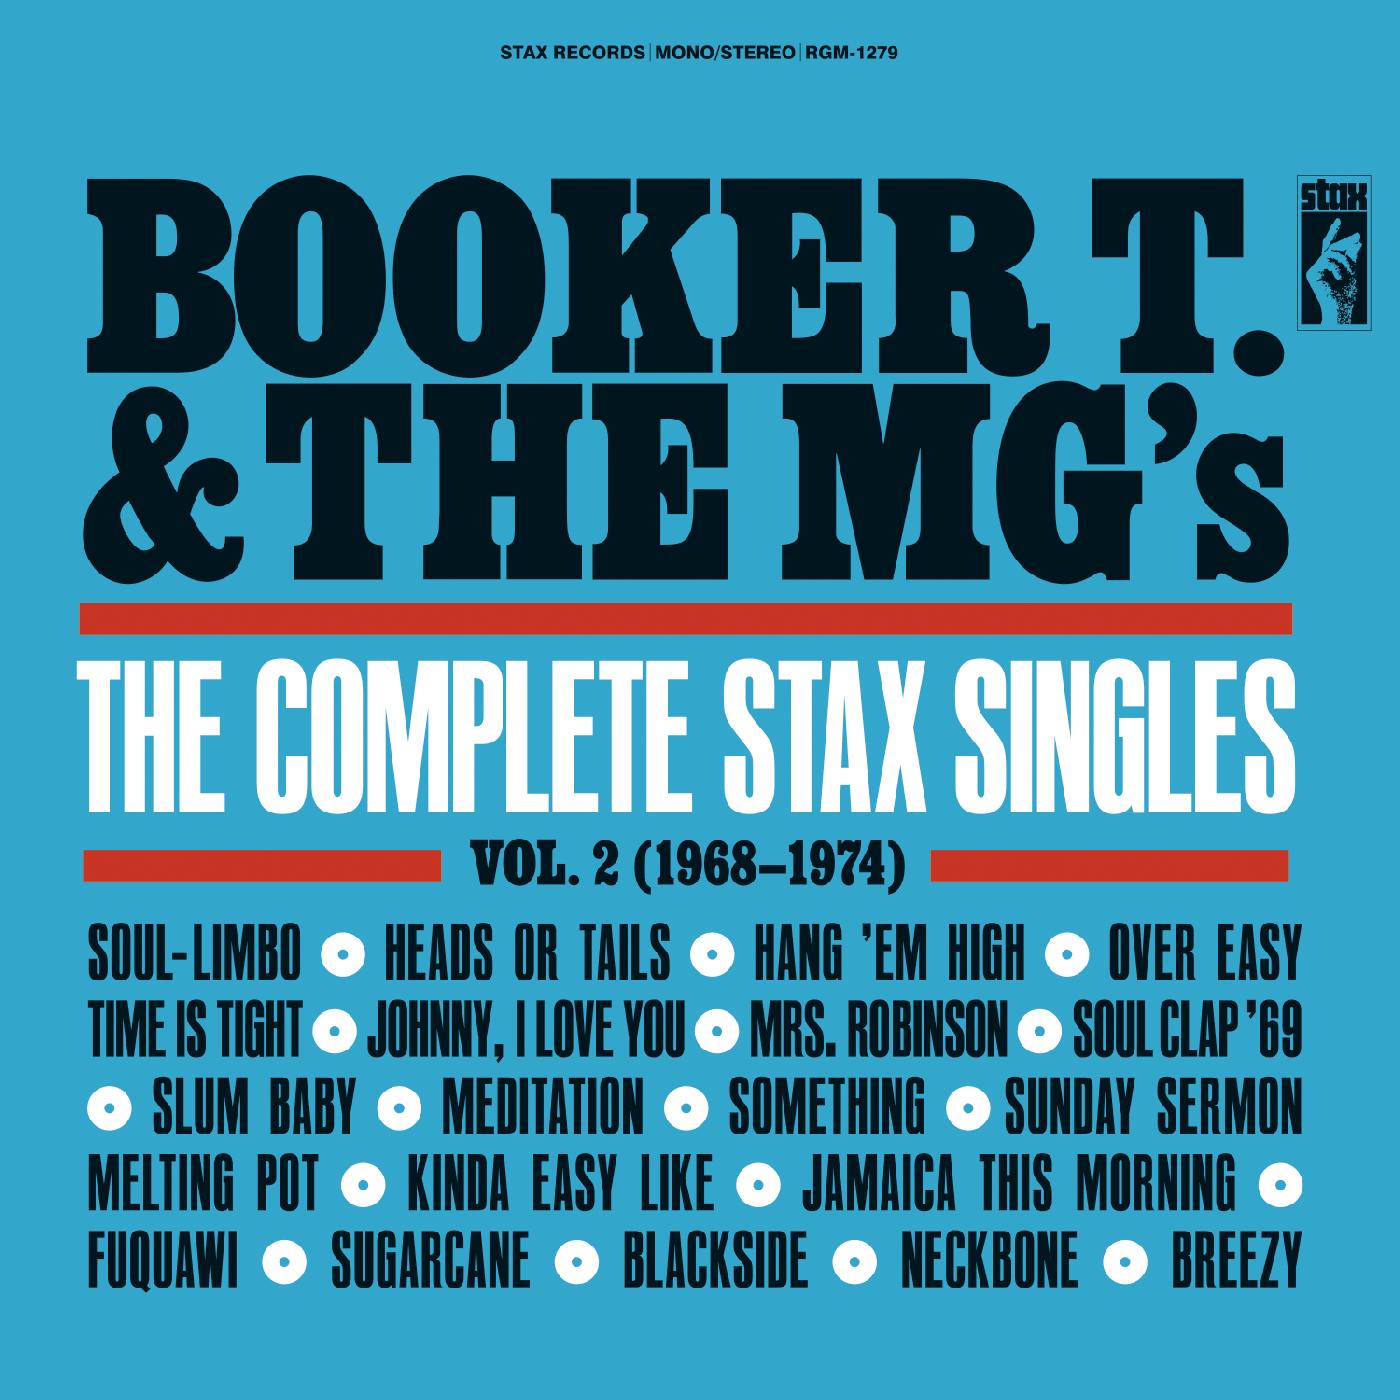 Booker T. & the MG's | The Complete Stax Singles Vol. 2 (1968-1974) (2-LP, Red Vinyl) | Vinyl